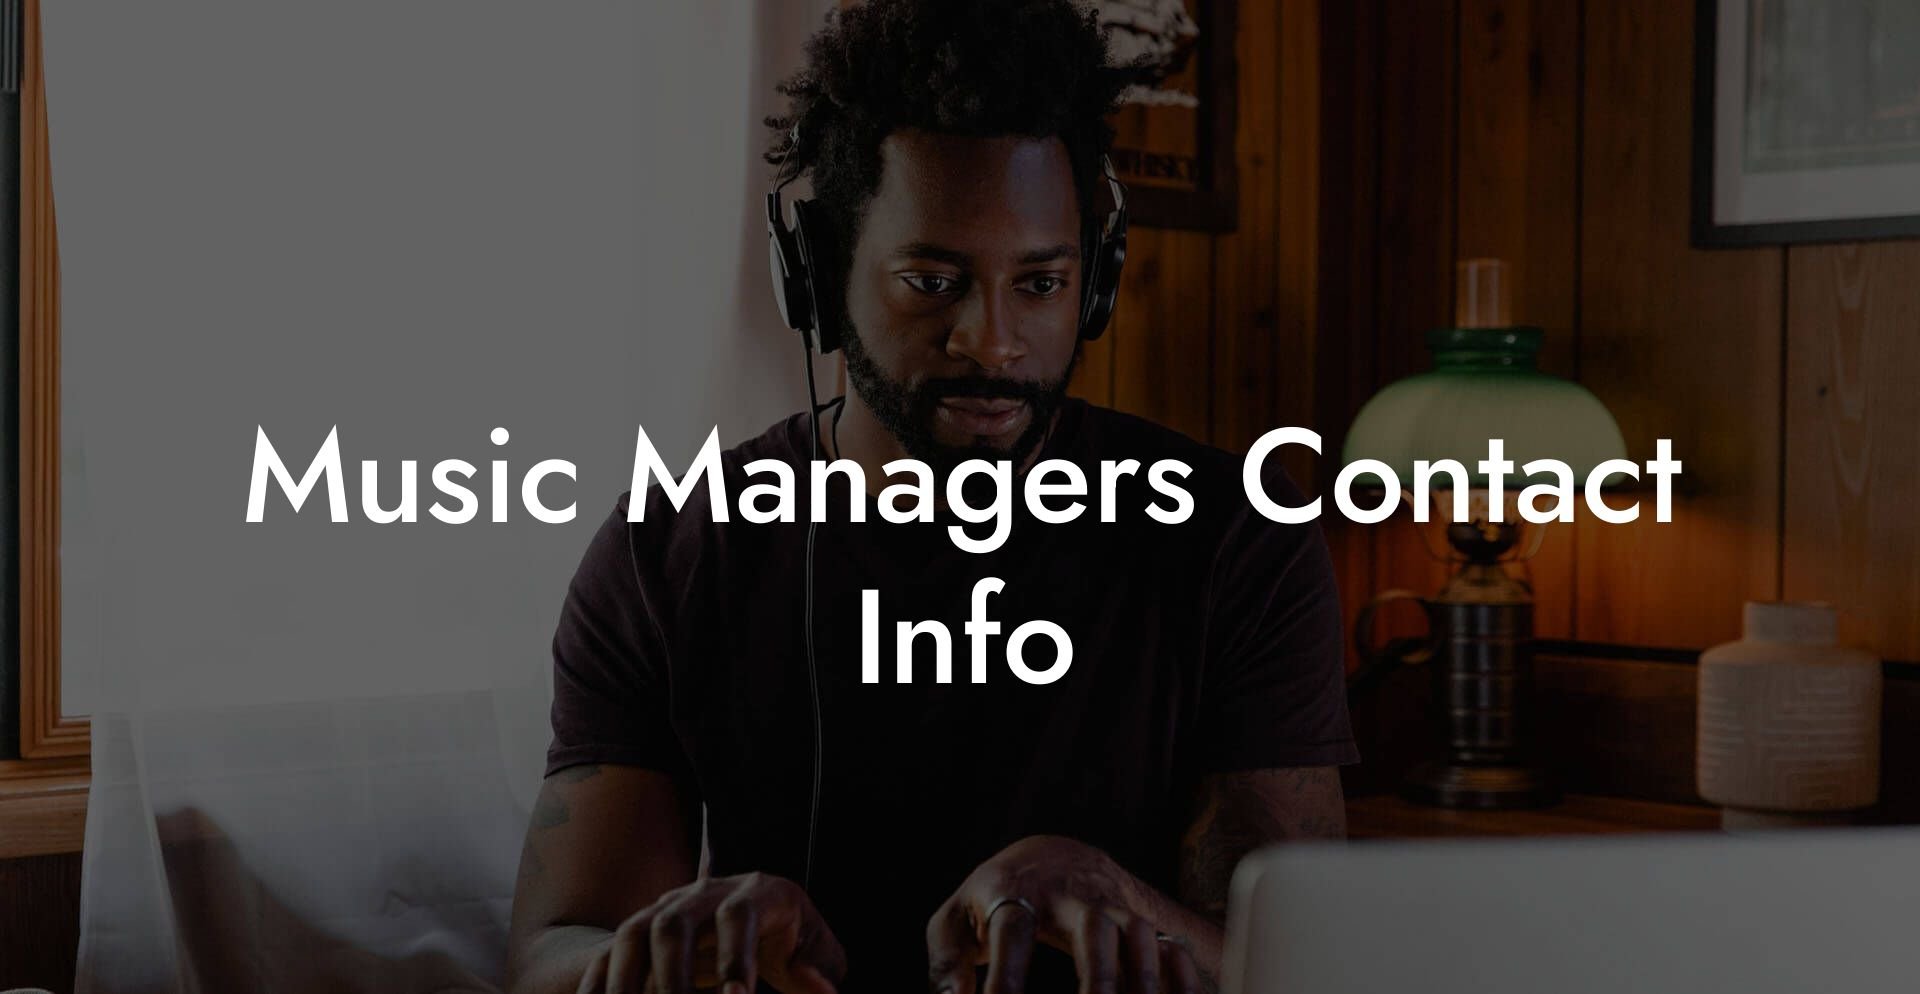 Music Managers Contact Info